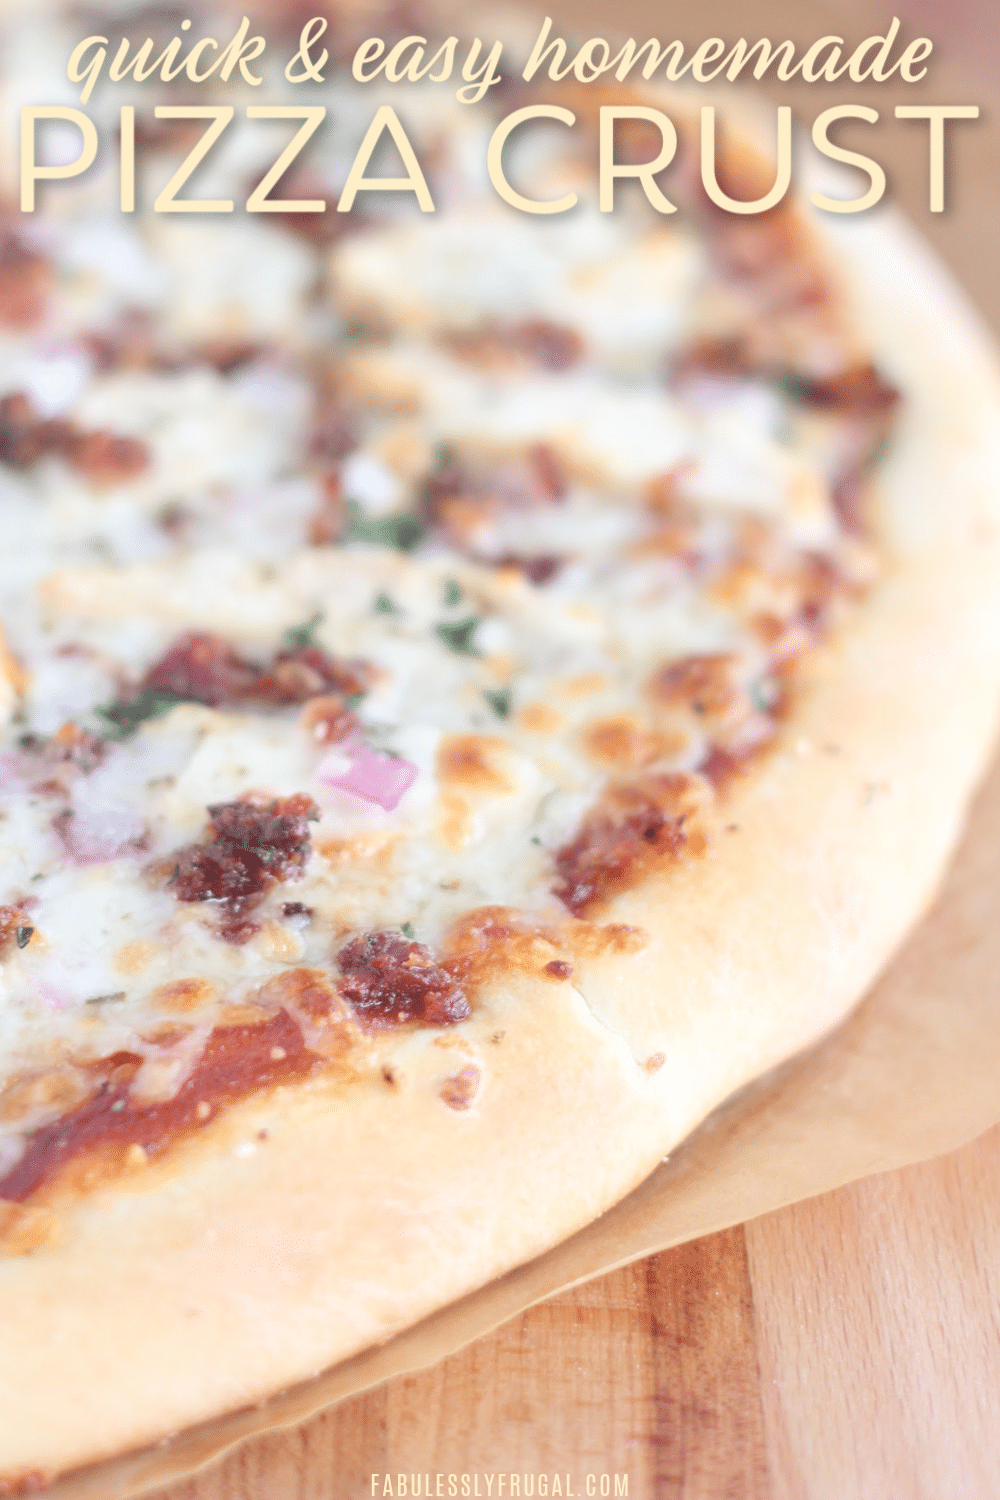 Quick and easy homemade pizza crust